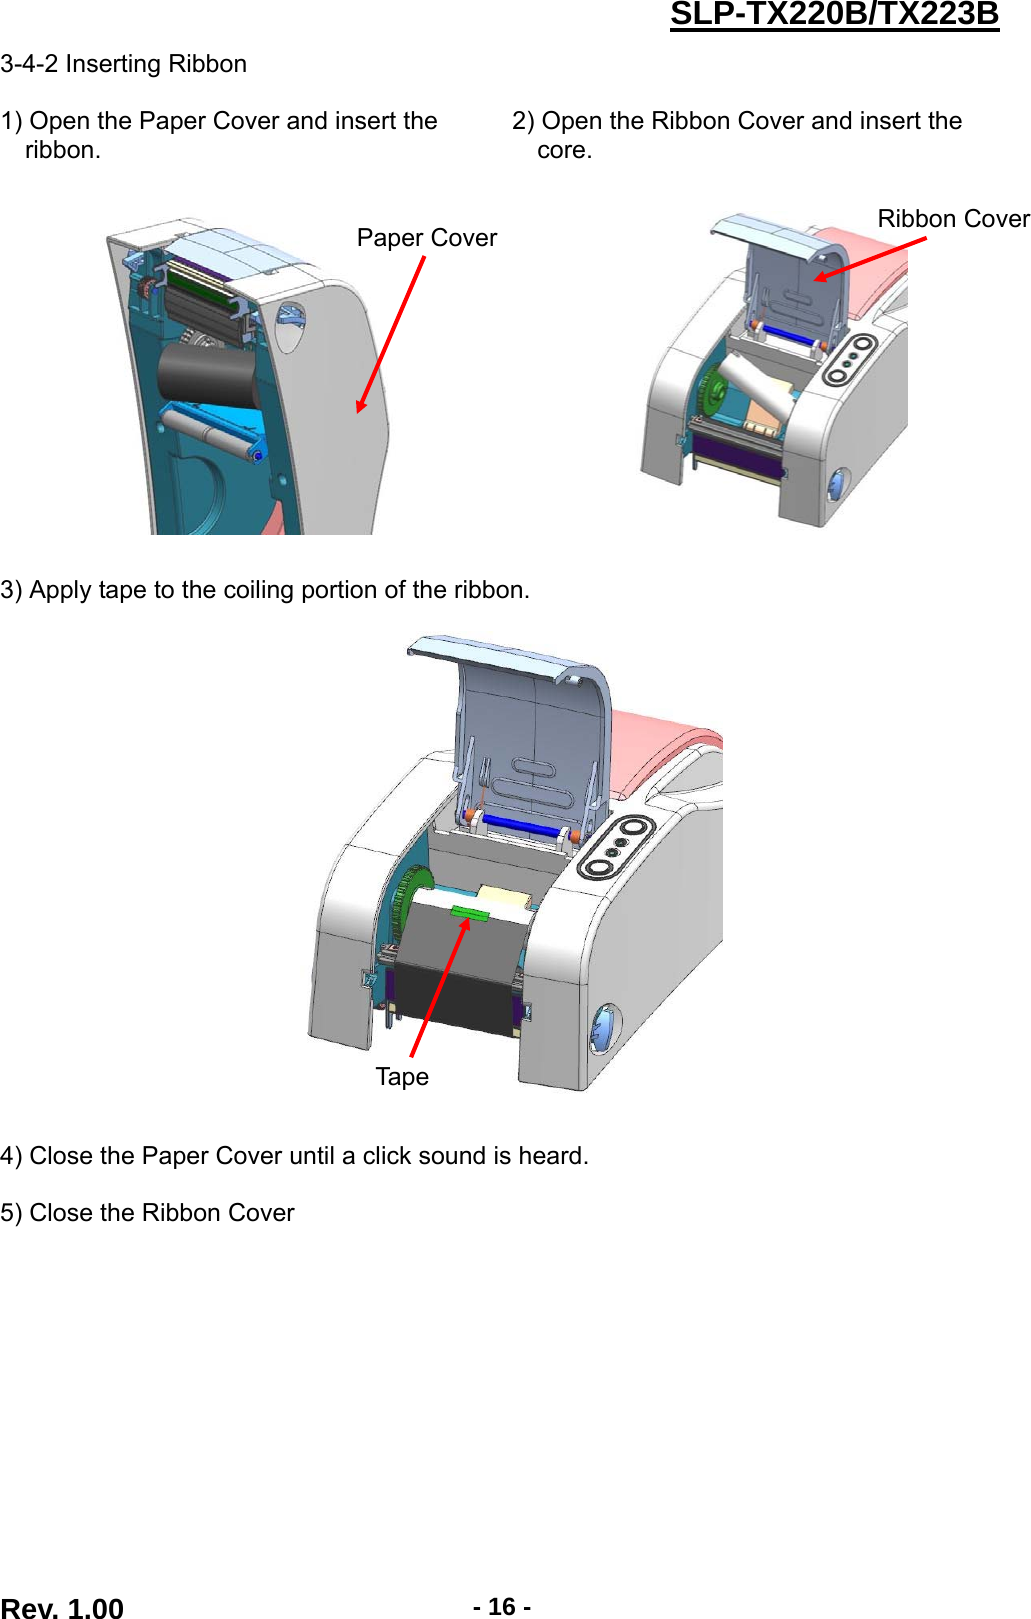  Rev. 1.00  - 16 -SLP-TX220B/TX223B3-4-2 Inserting Ribbon  1) Open the Paper Cover and insert the   ribbon. 2) Open the Ribbon Cover and insert the   core.       3) Apply tape to the coiling portion of the ribbon.    4) Close the Paper Cover until a click sound is heard. 5) Close the Ribbon Cover   Paper Cover  Ribbon CoverTape 